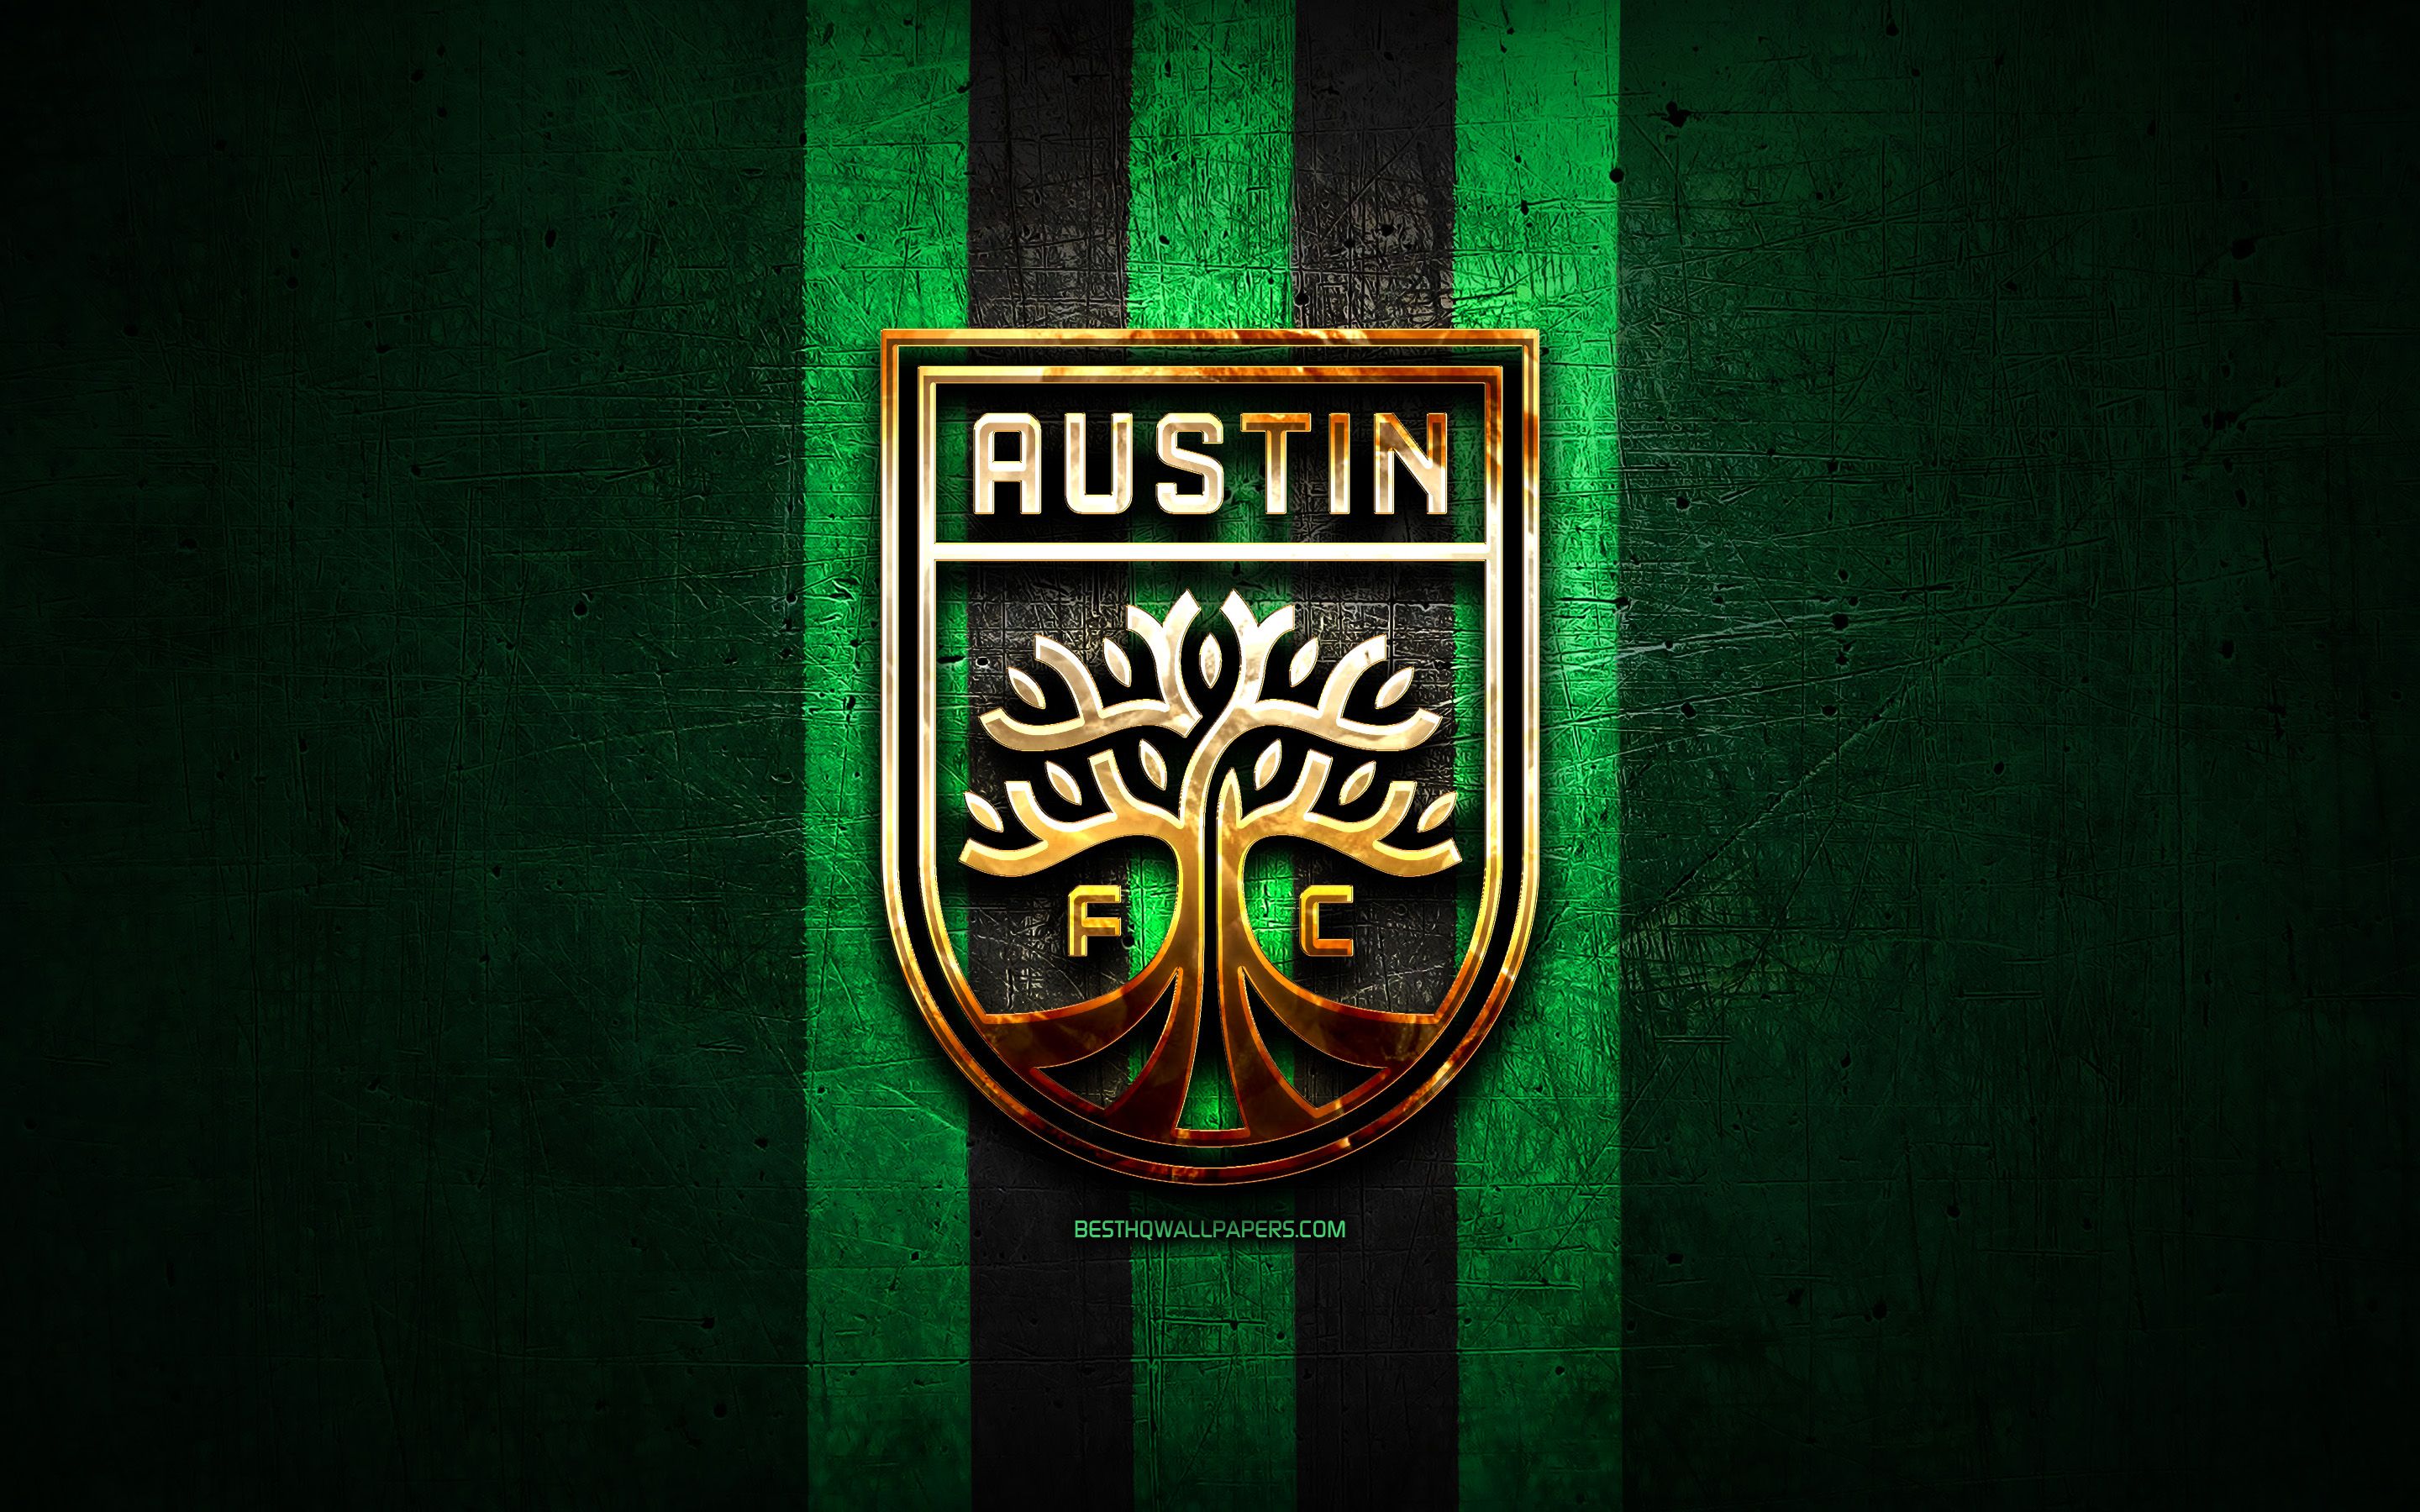 Download wallpaper Austin FC, golden logo, USL, green metal background, american soccer club, United Soccer League, Austin FC logo, soccer, USA for desktop with resolution 2880x1800. High Quality HD picture wallpaper